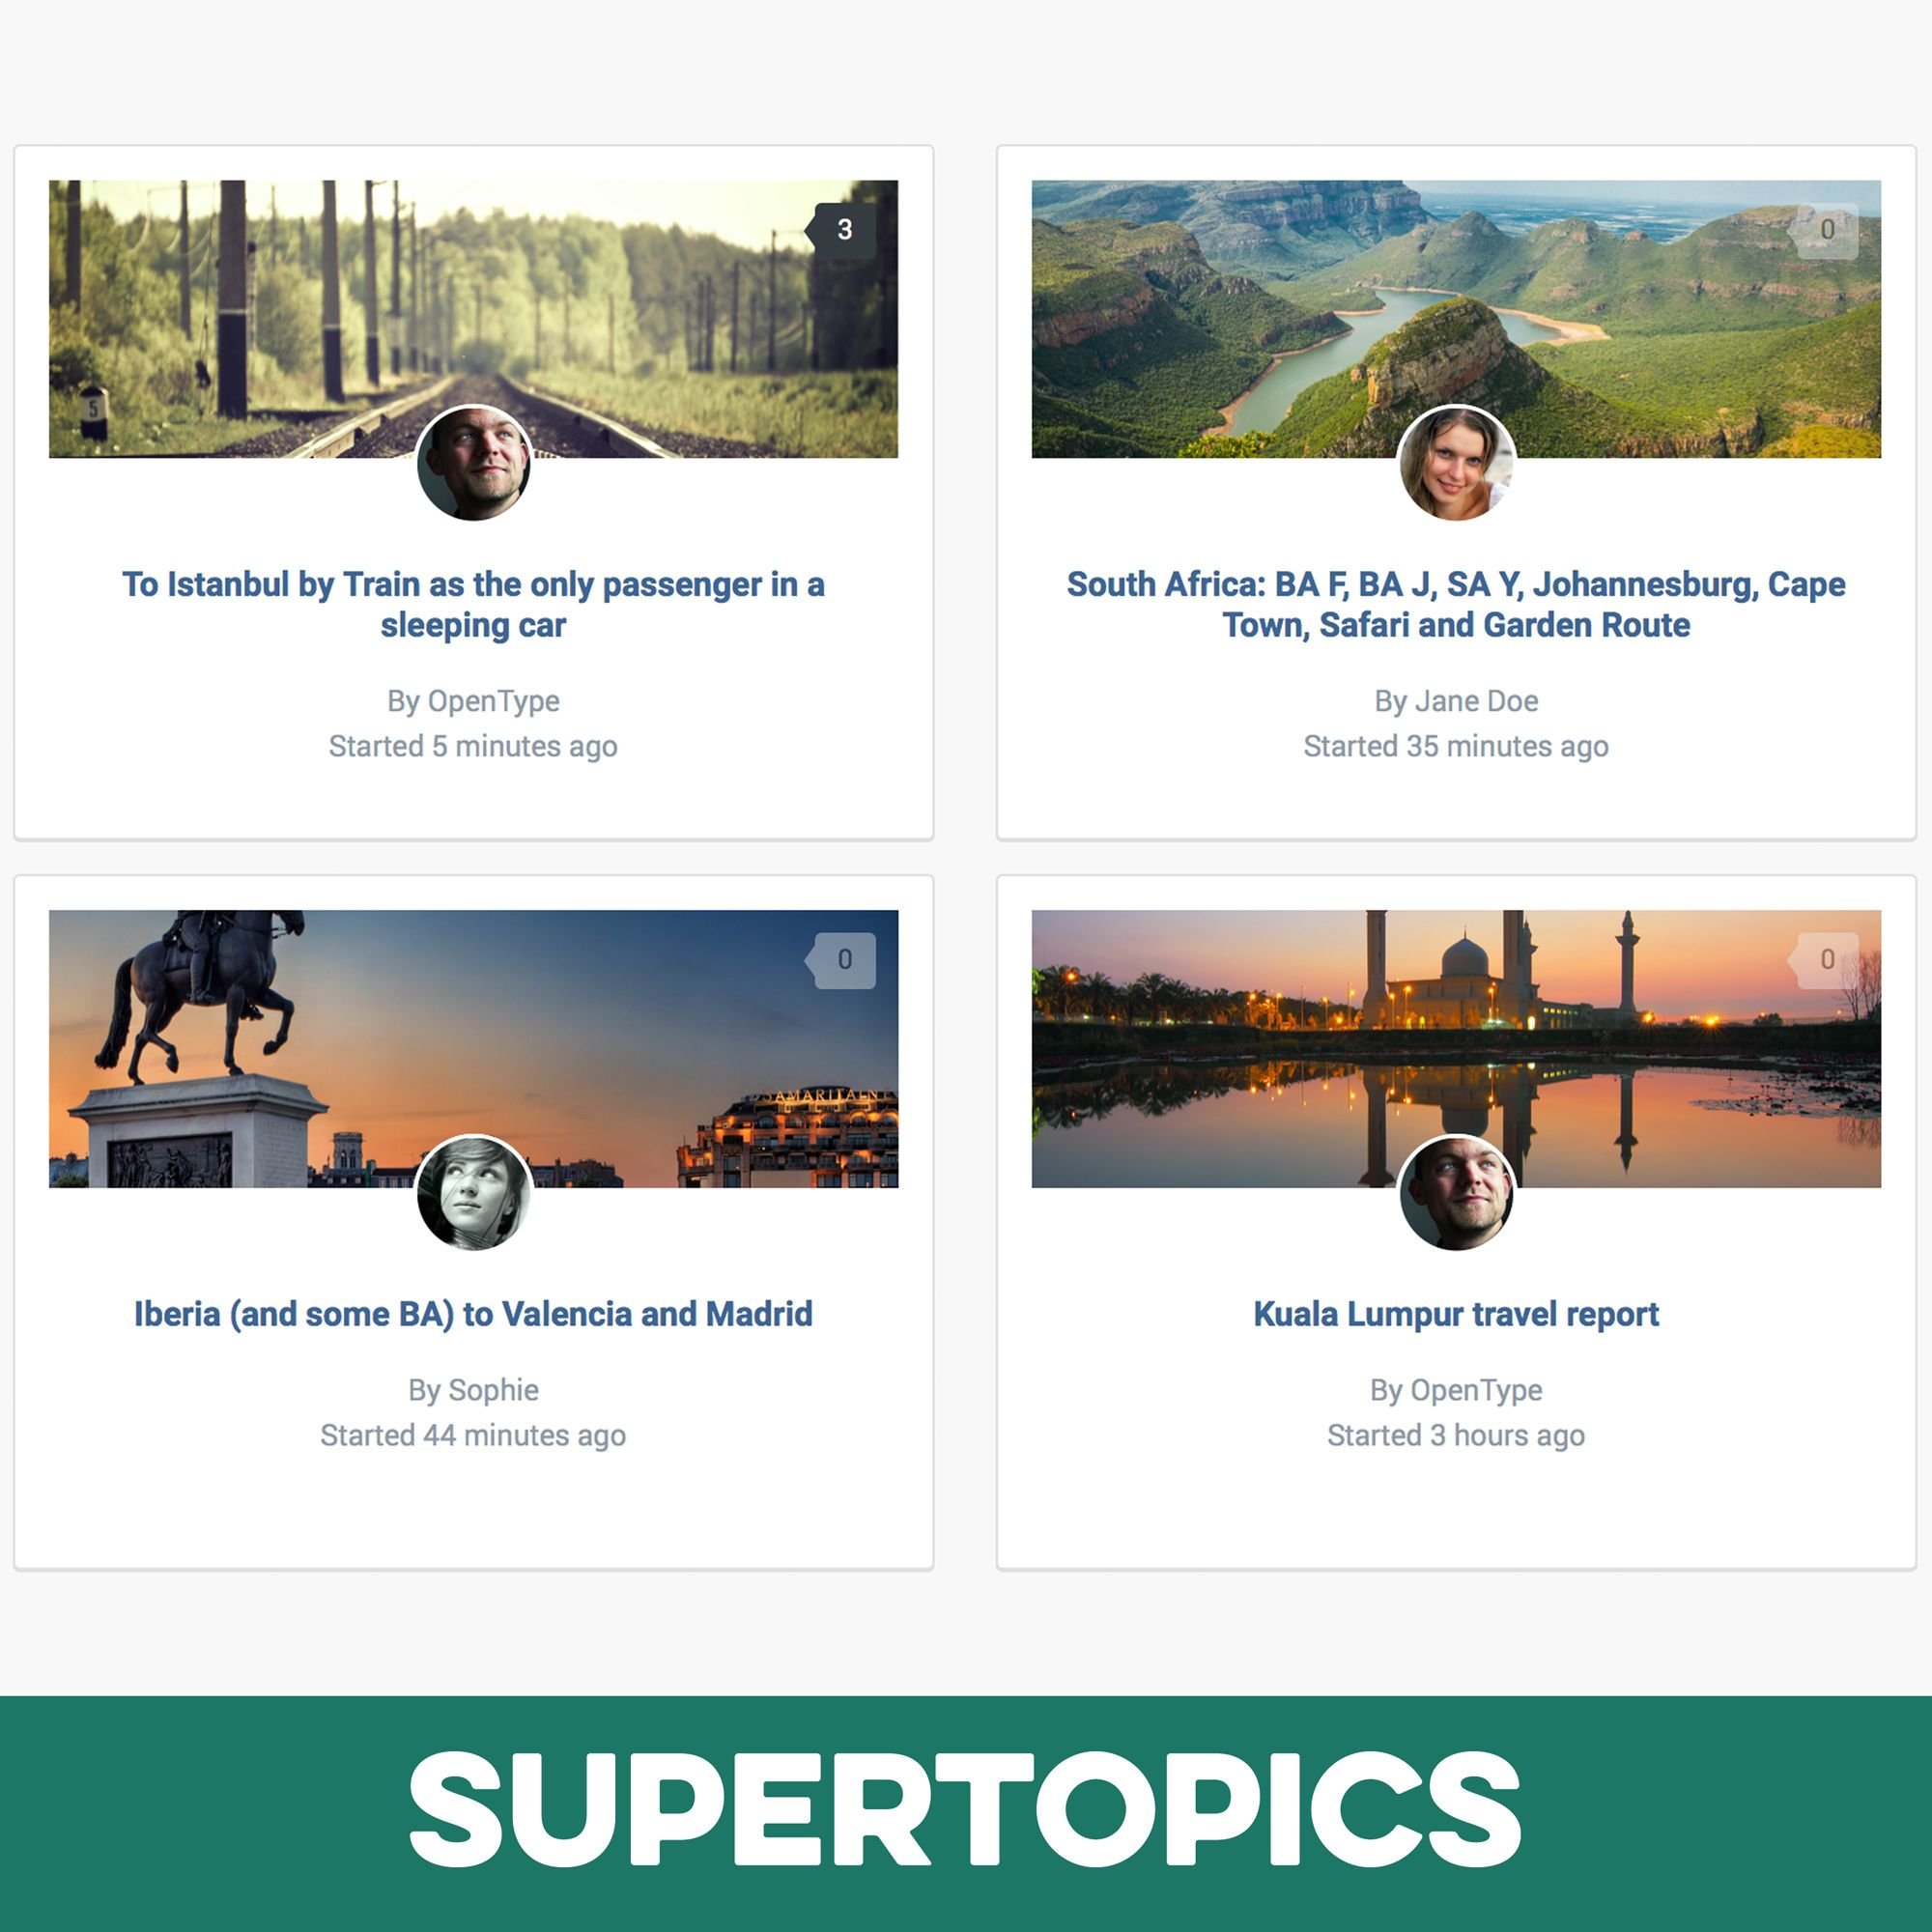 More information about "SuperTopics"